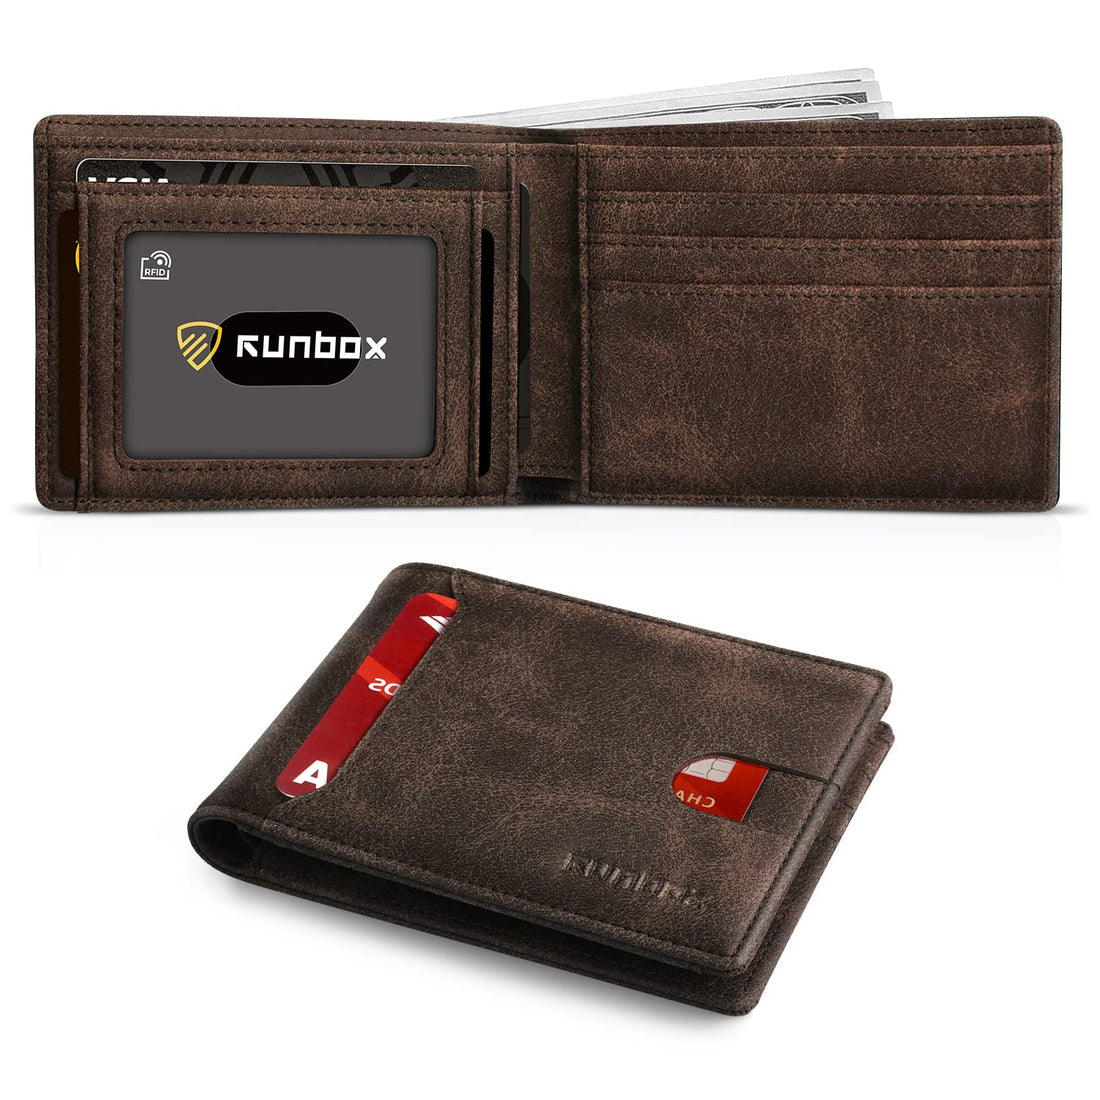 RUNBOX Slim Wallet for Men Bifold Minimalist Leather RFID Blocking with Gift Box Brown, Glitter Brown, small